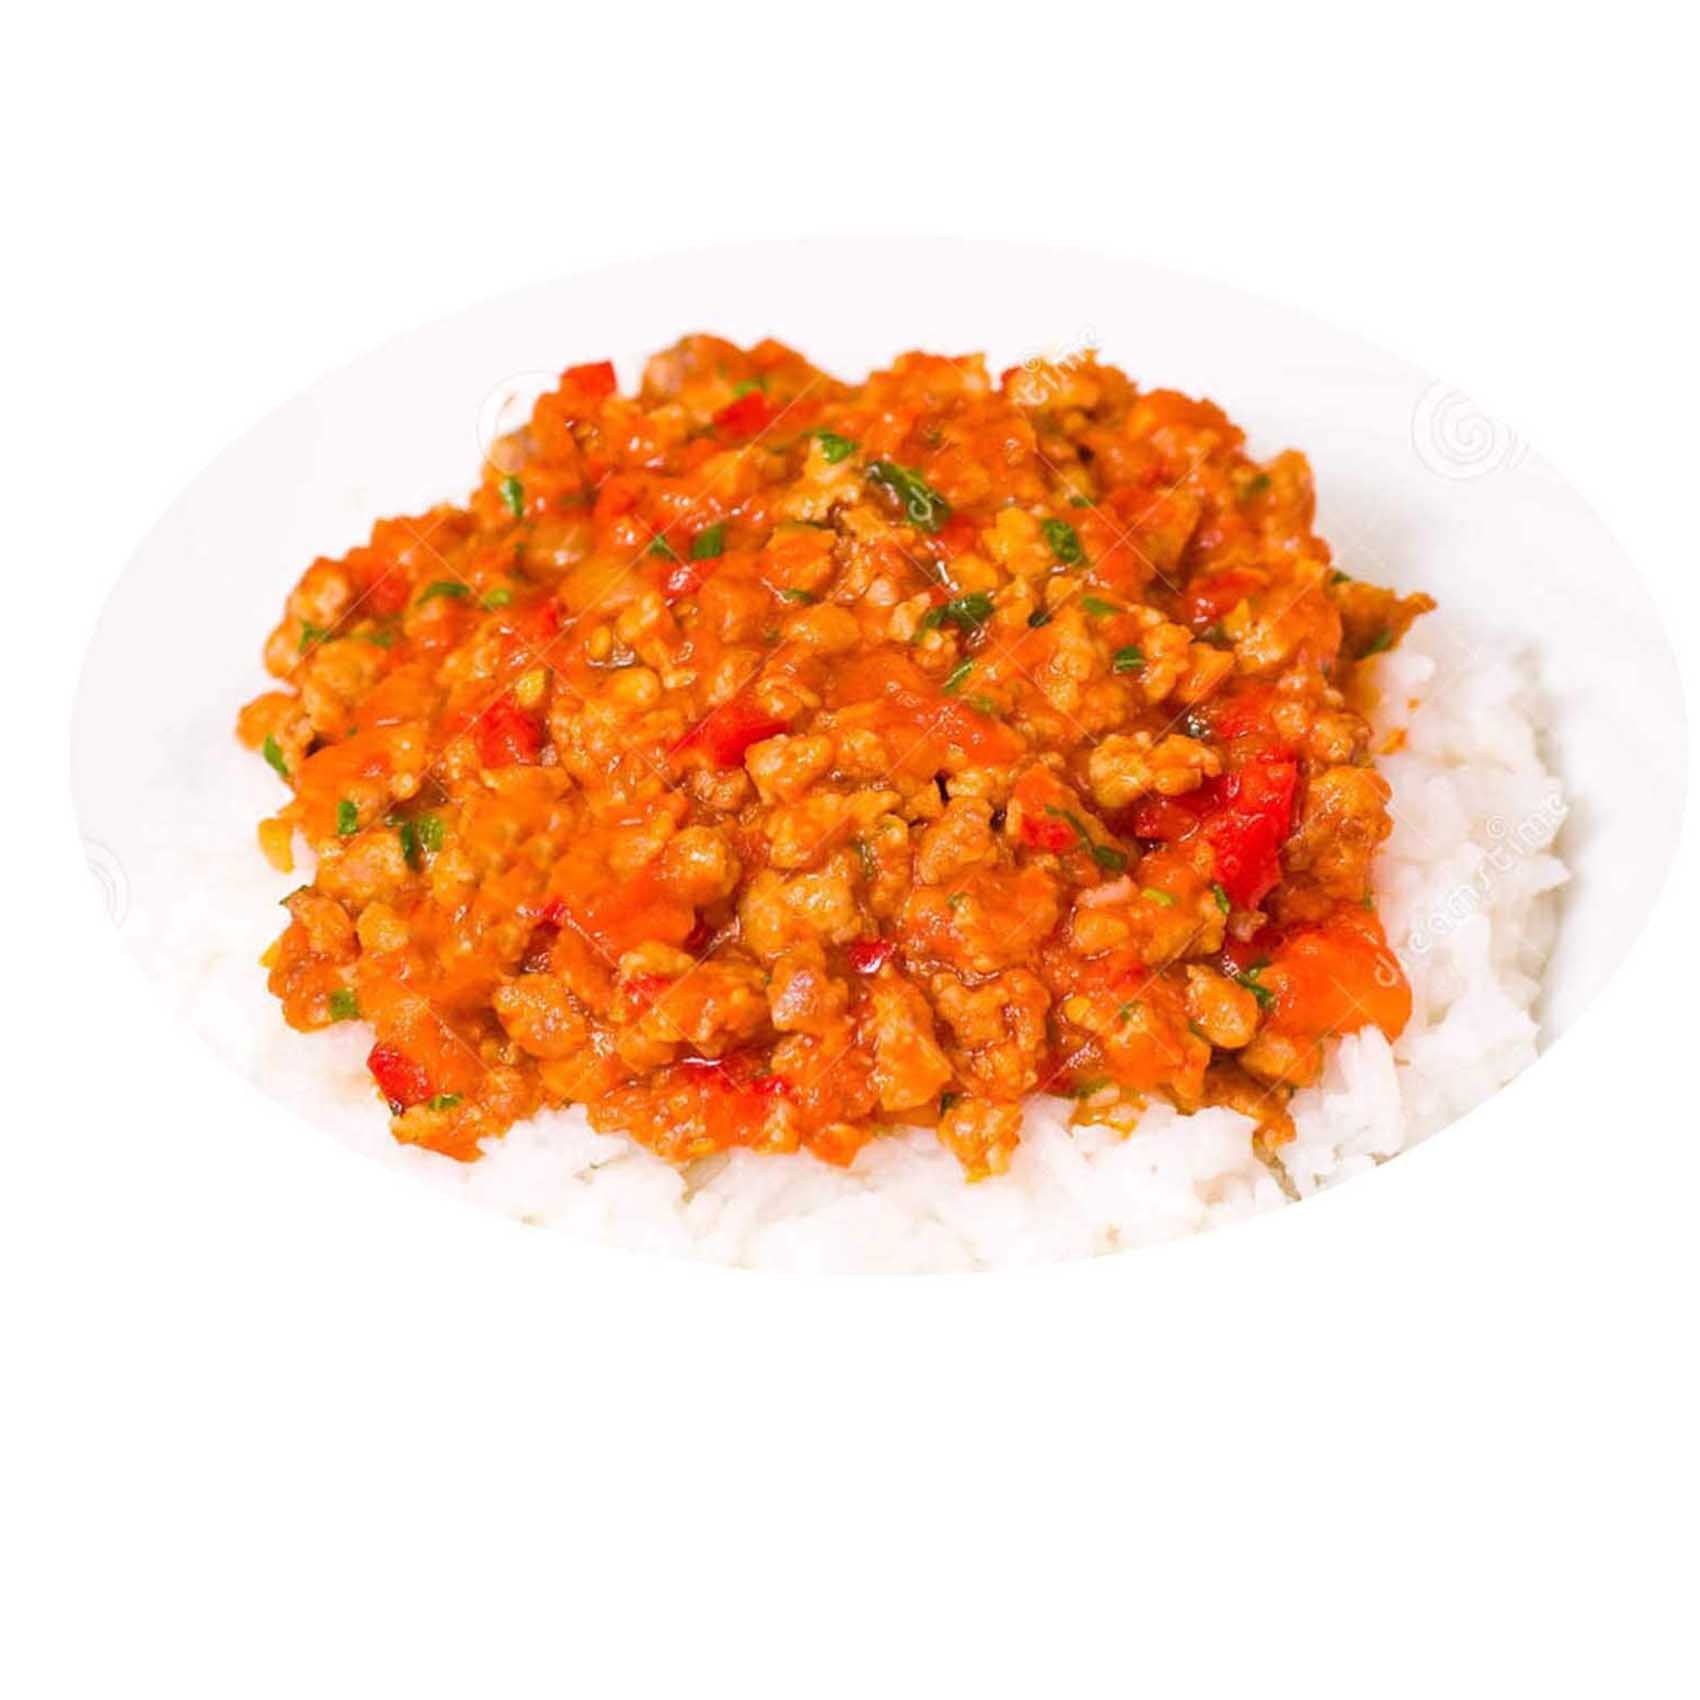 Rice with Beef Bolognese